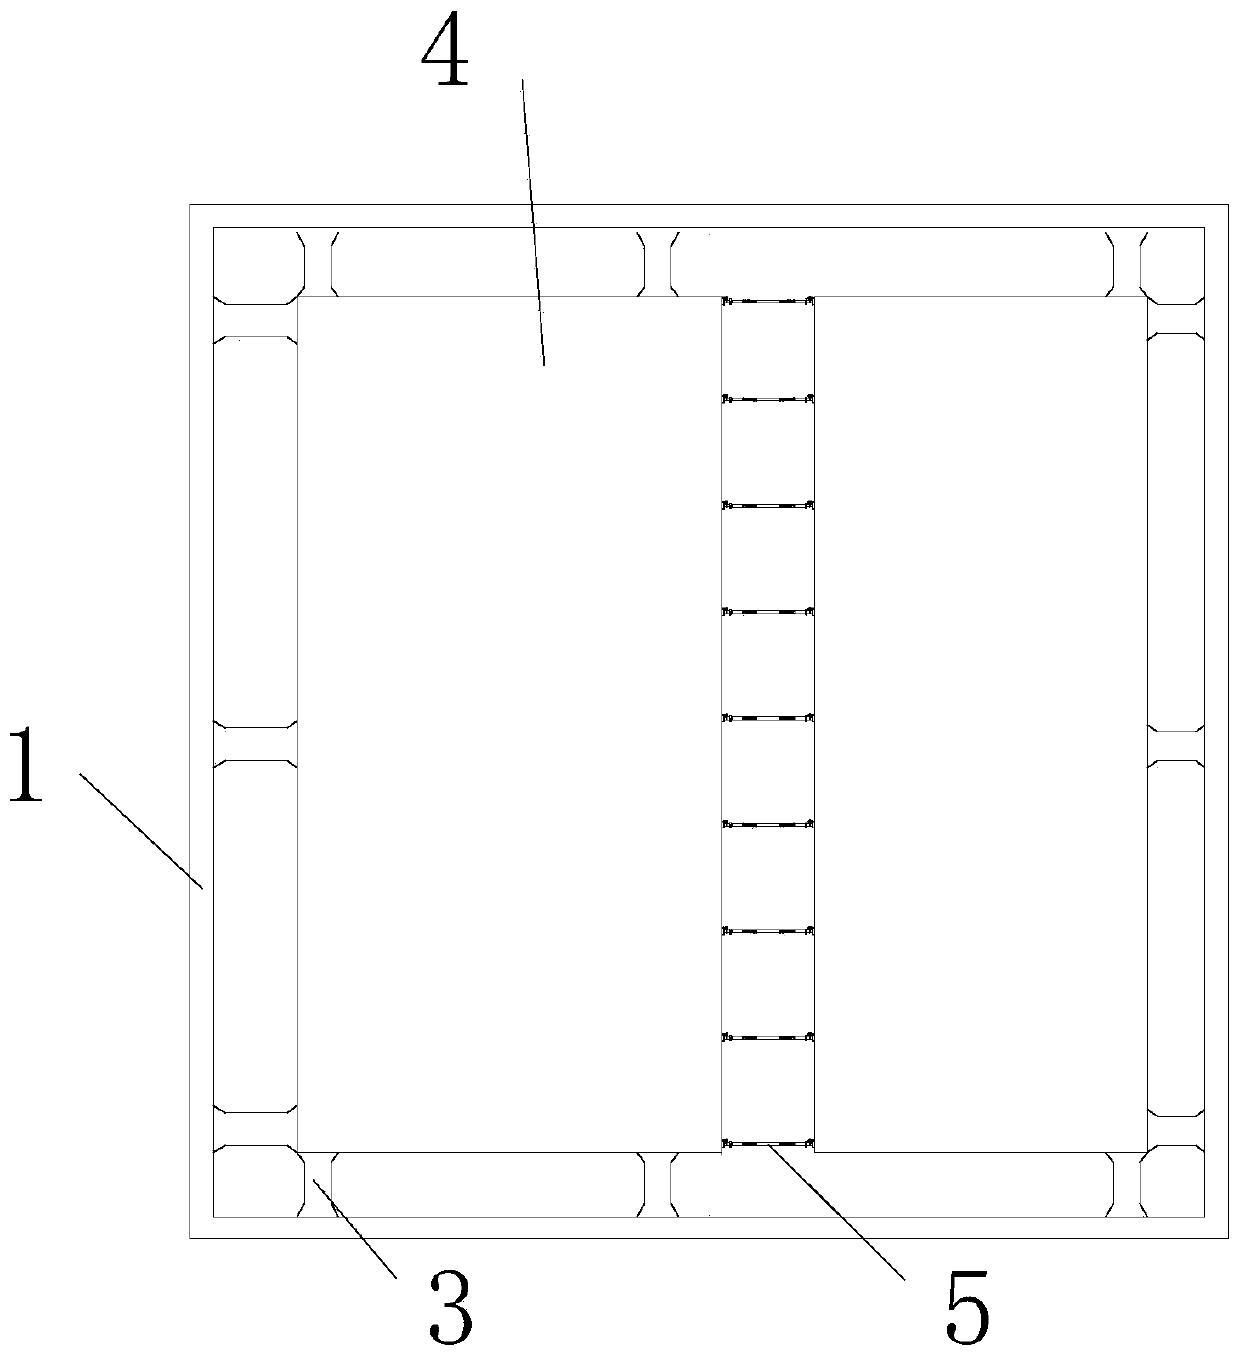 Annular inner support system for foundation pit and support replacement construction method